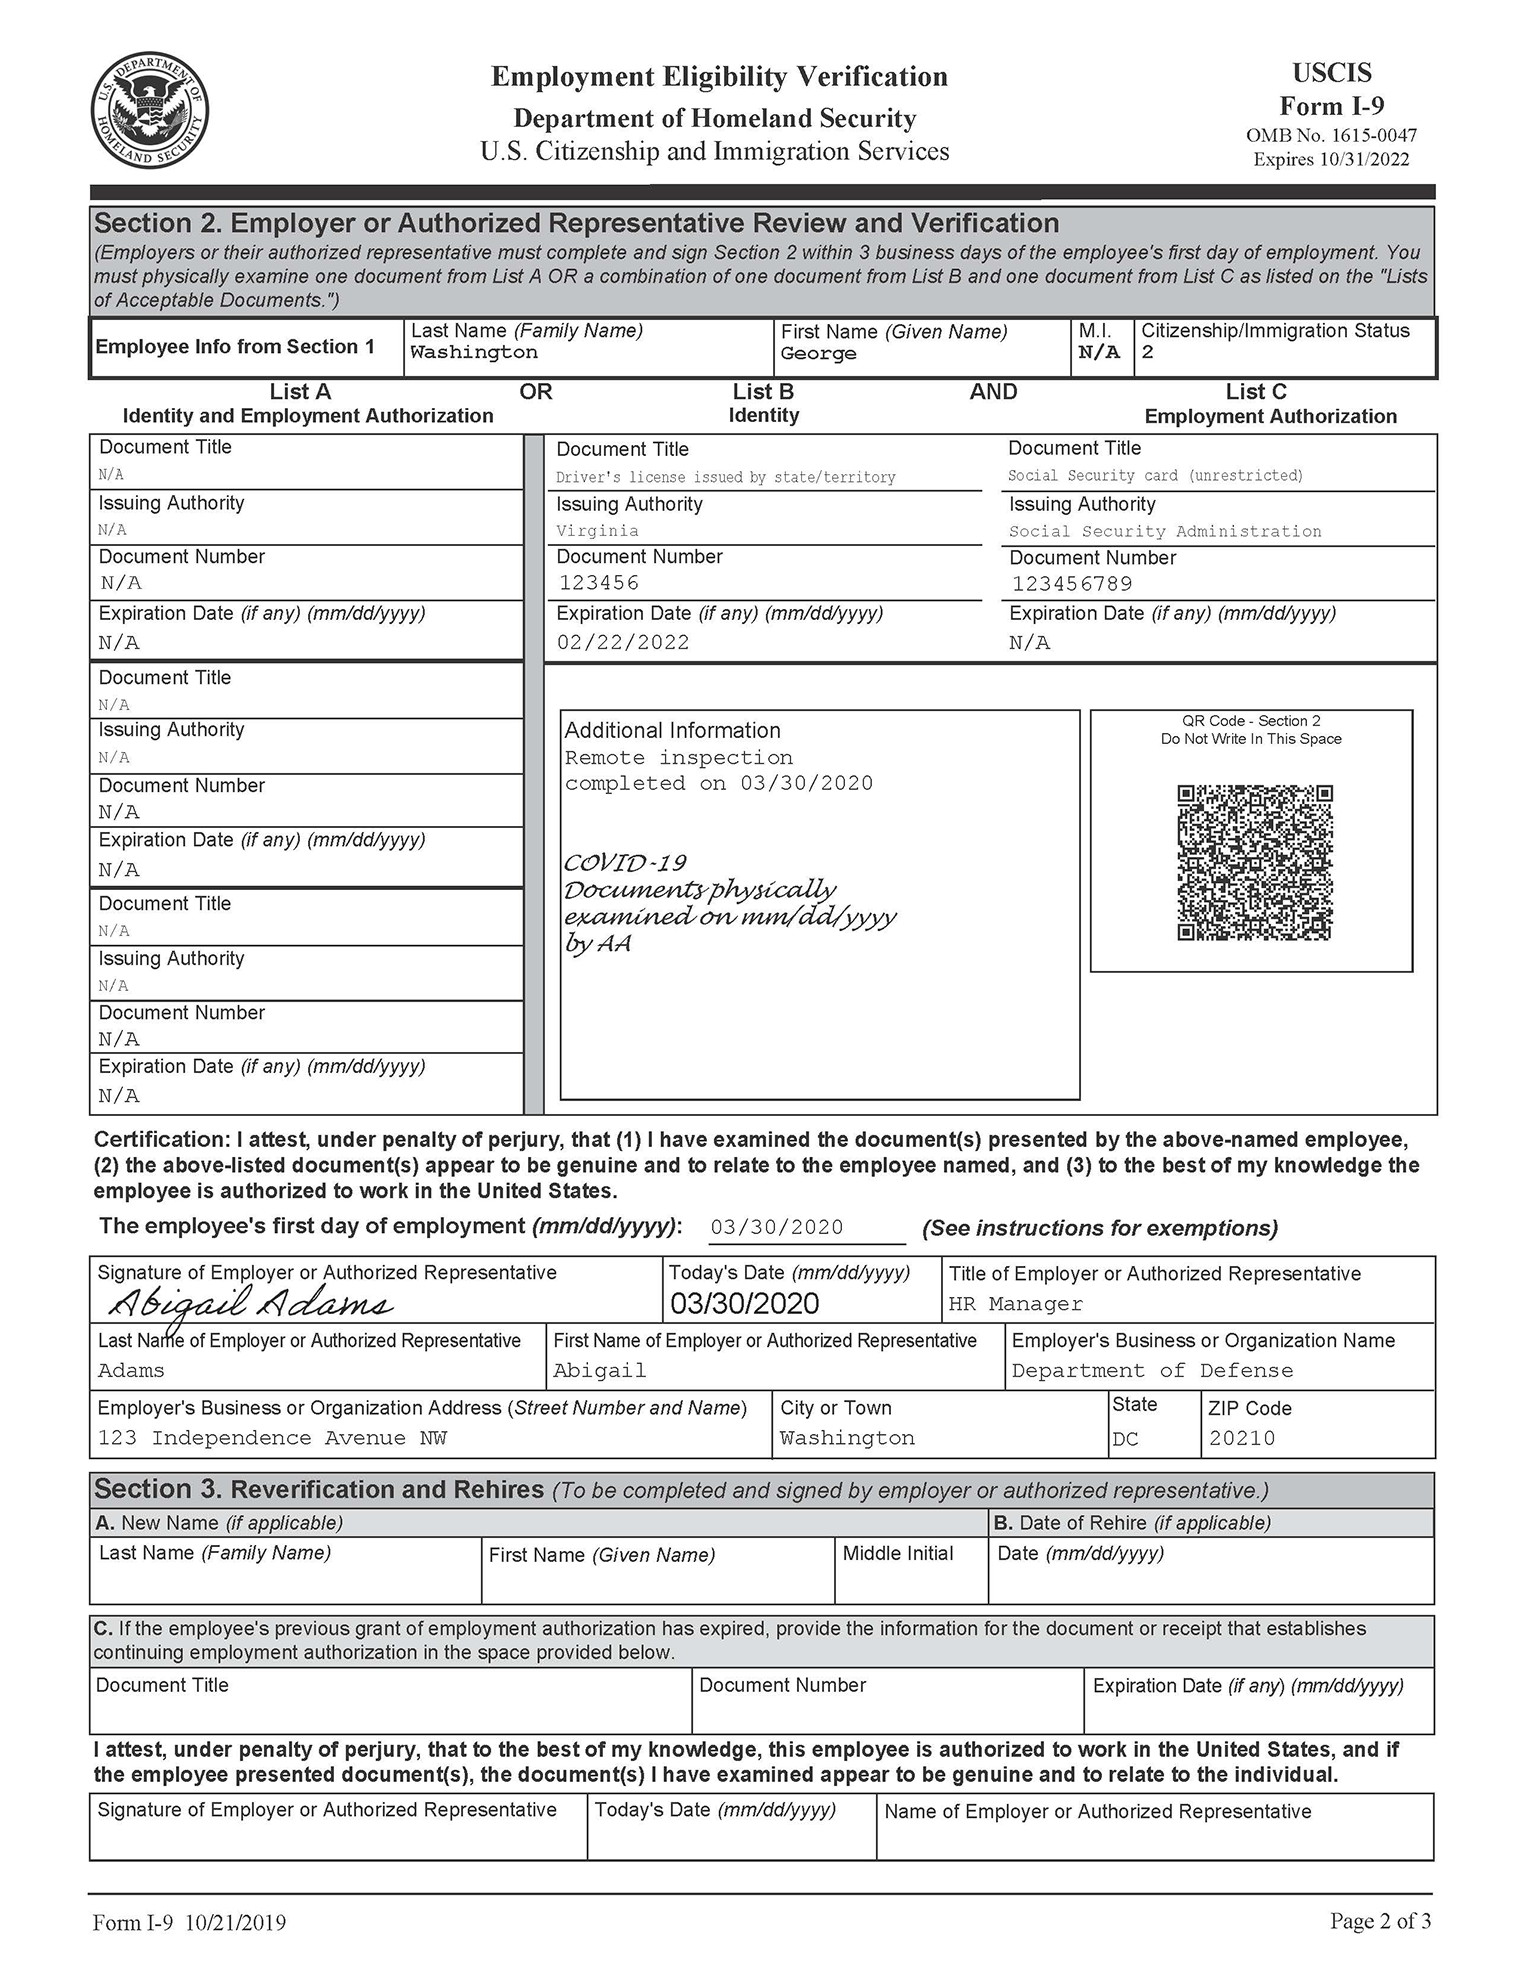 Sample Form I9 with remote inspection notation in the additional information section has an added notation that says " COVID 19 Documents physically examined on (Date) by (Signature of person reviewing documents)